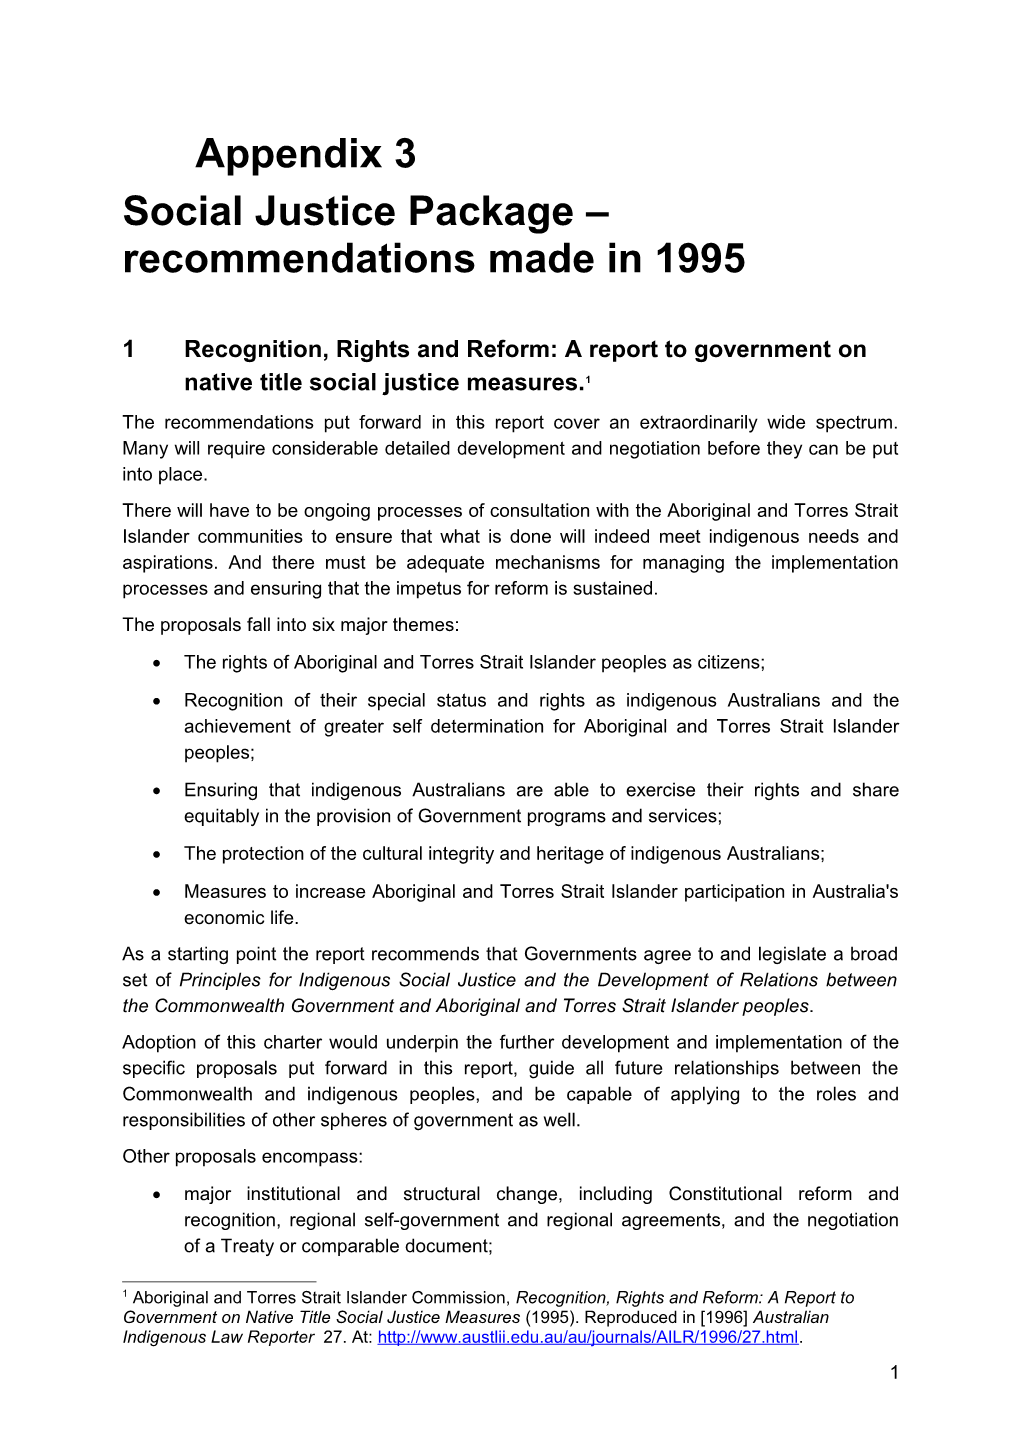 Social Justice Package Recommendations Made in 1995